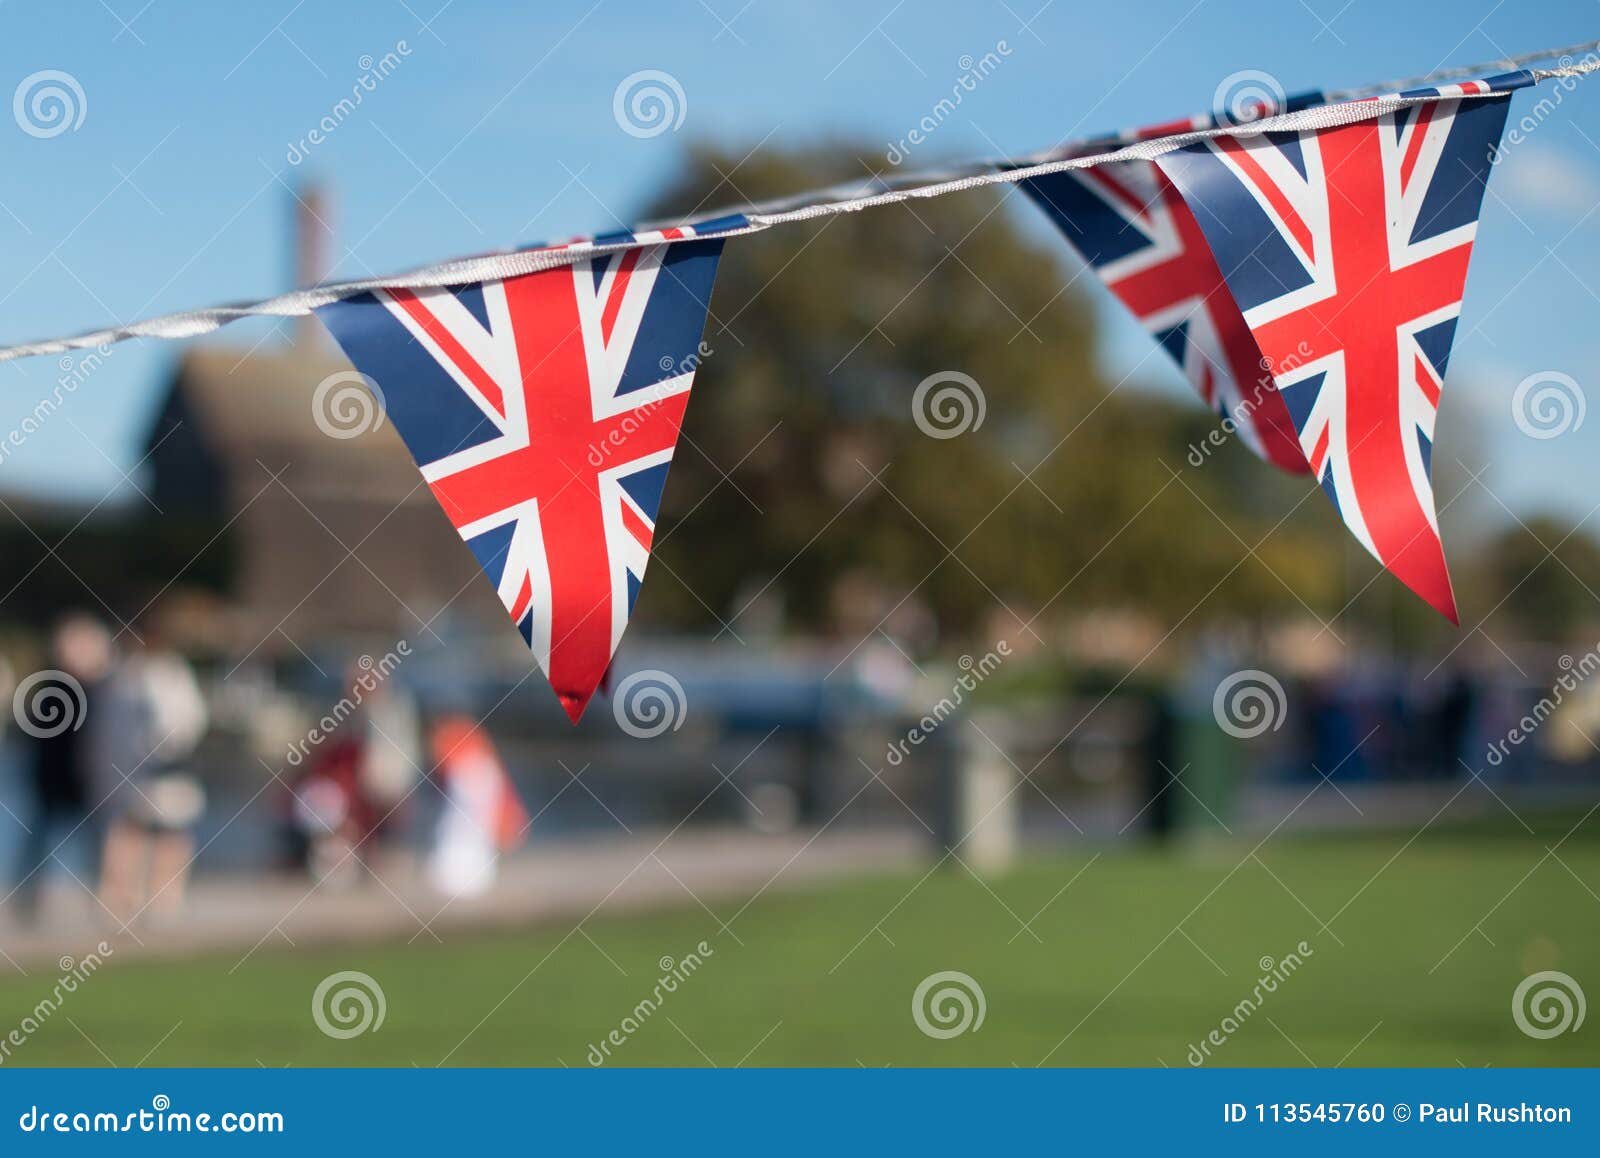 Union Jack Bunting Flags Triangle Banner Royal Prince Garden Party British